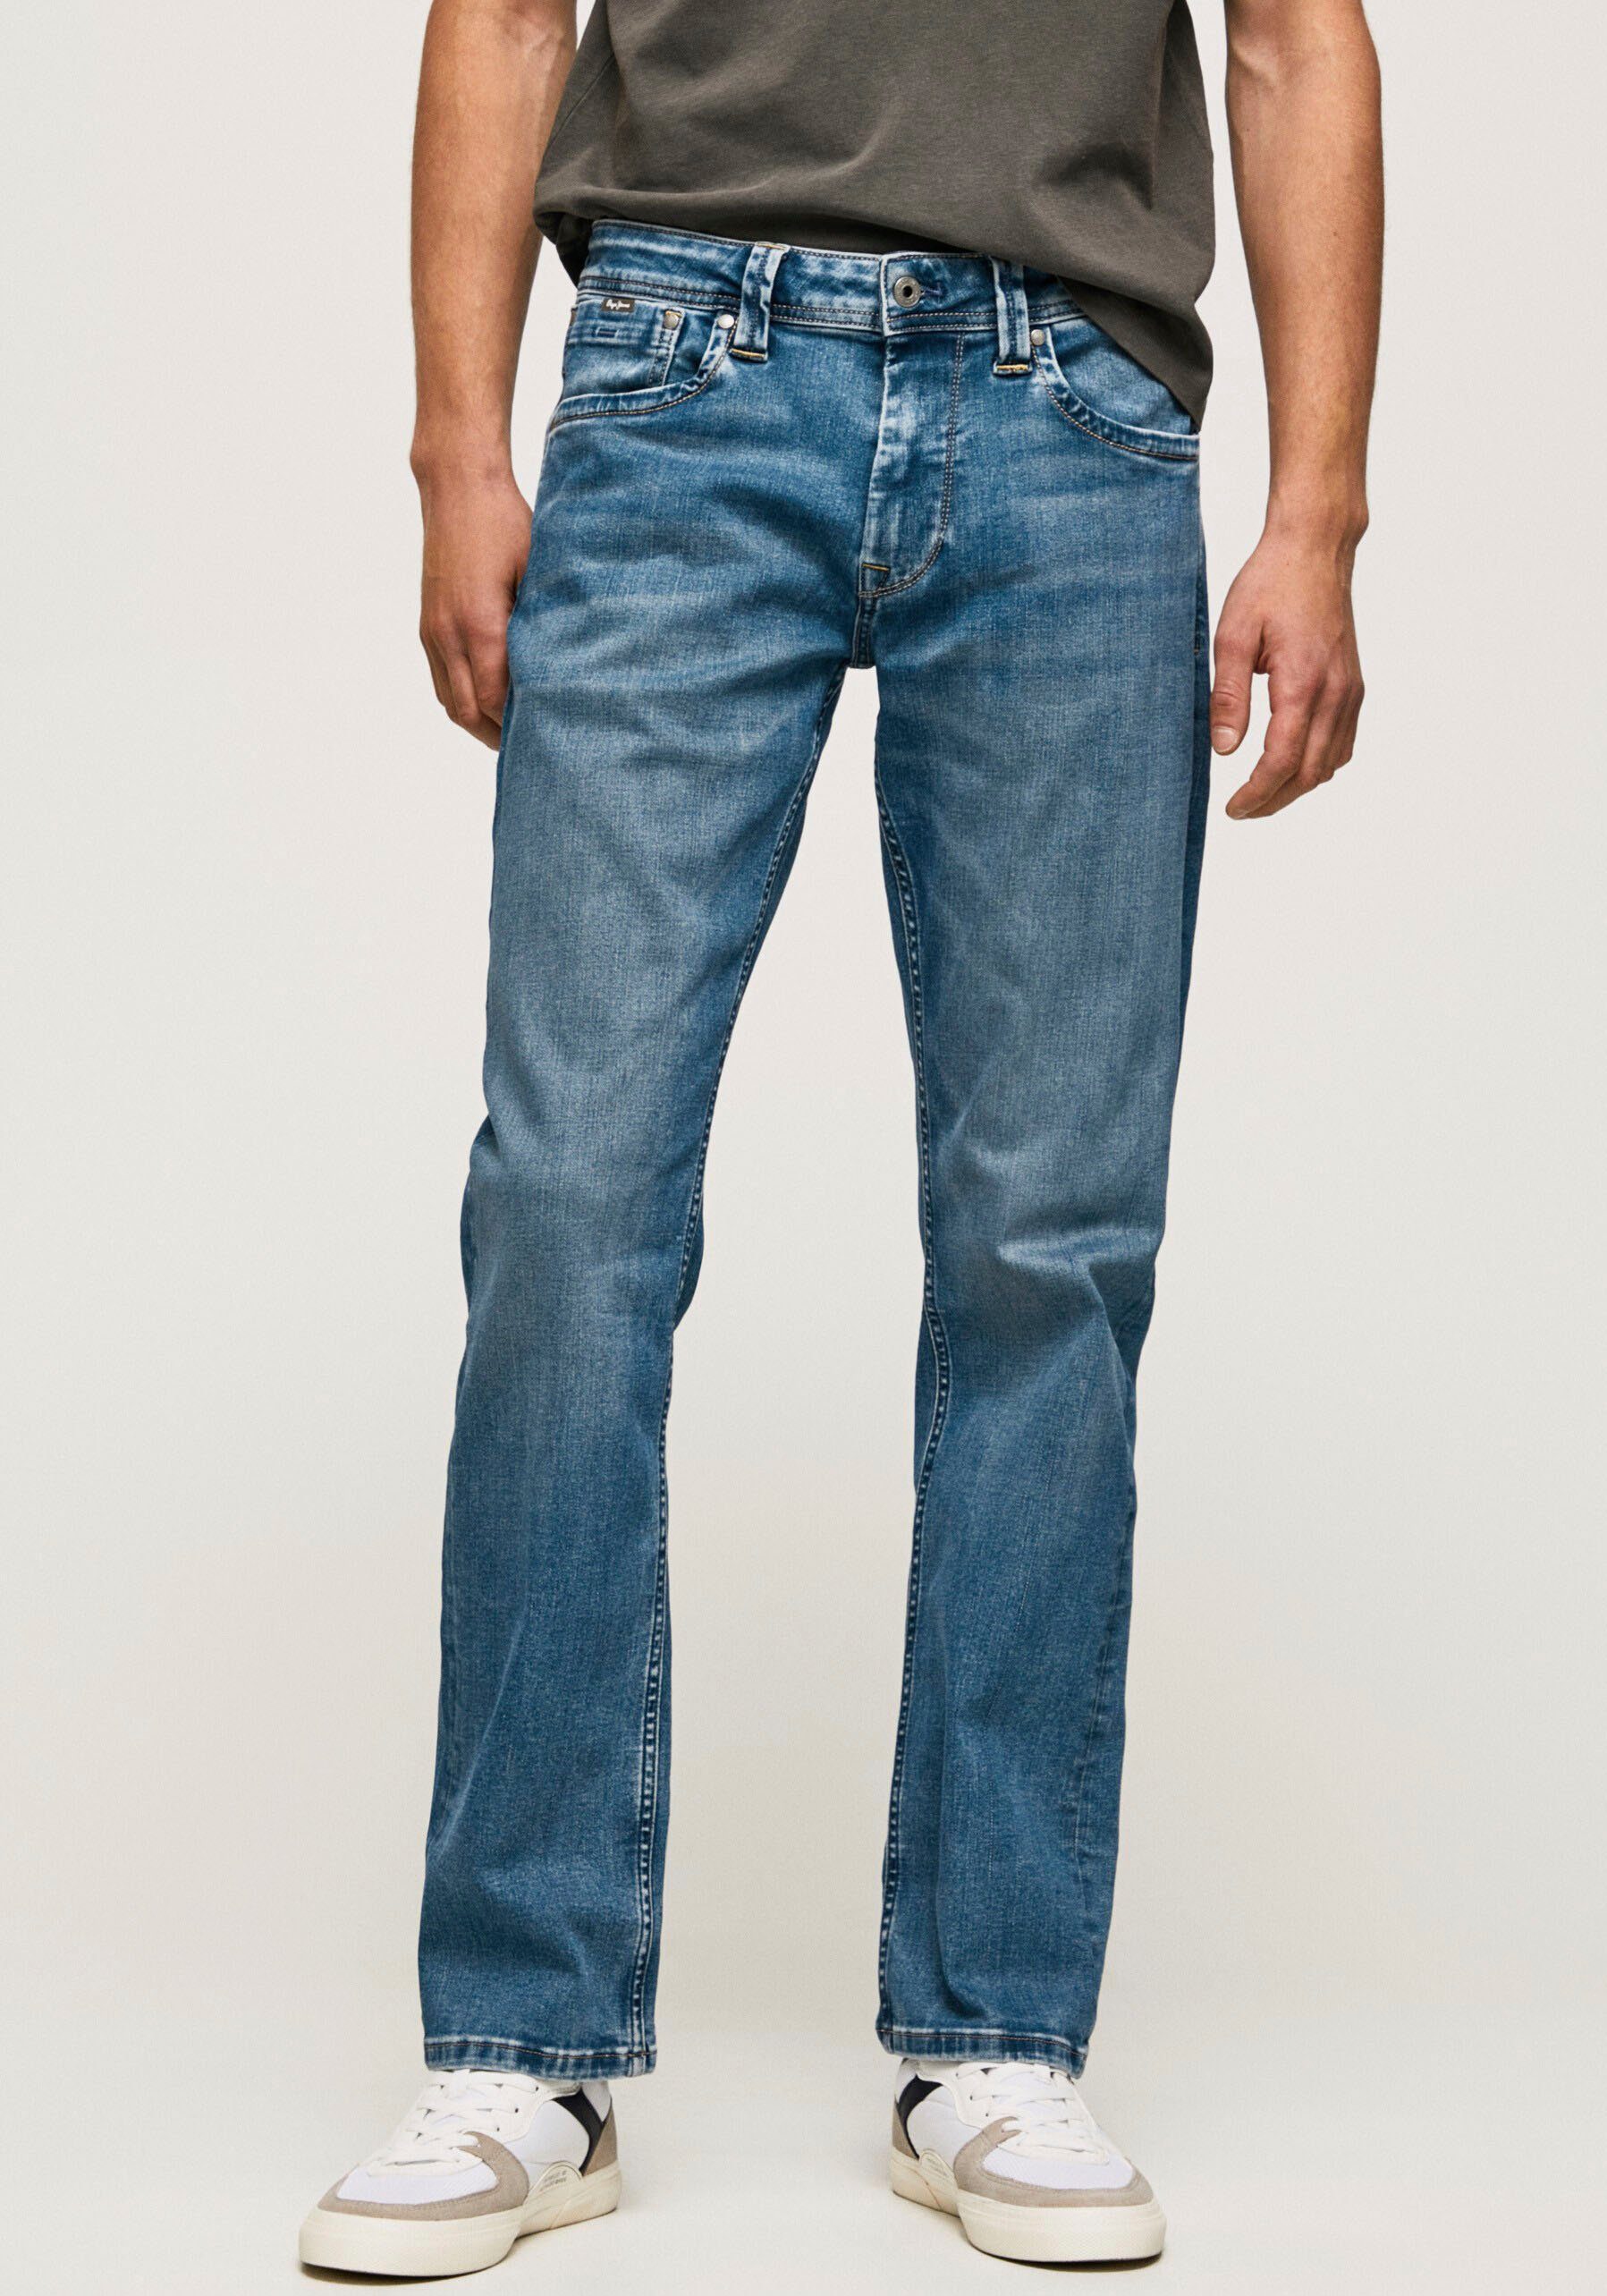 Pepe Jeans Straight-Jeans KINGSTON ZIP in 5-Pocket-Form limewiser